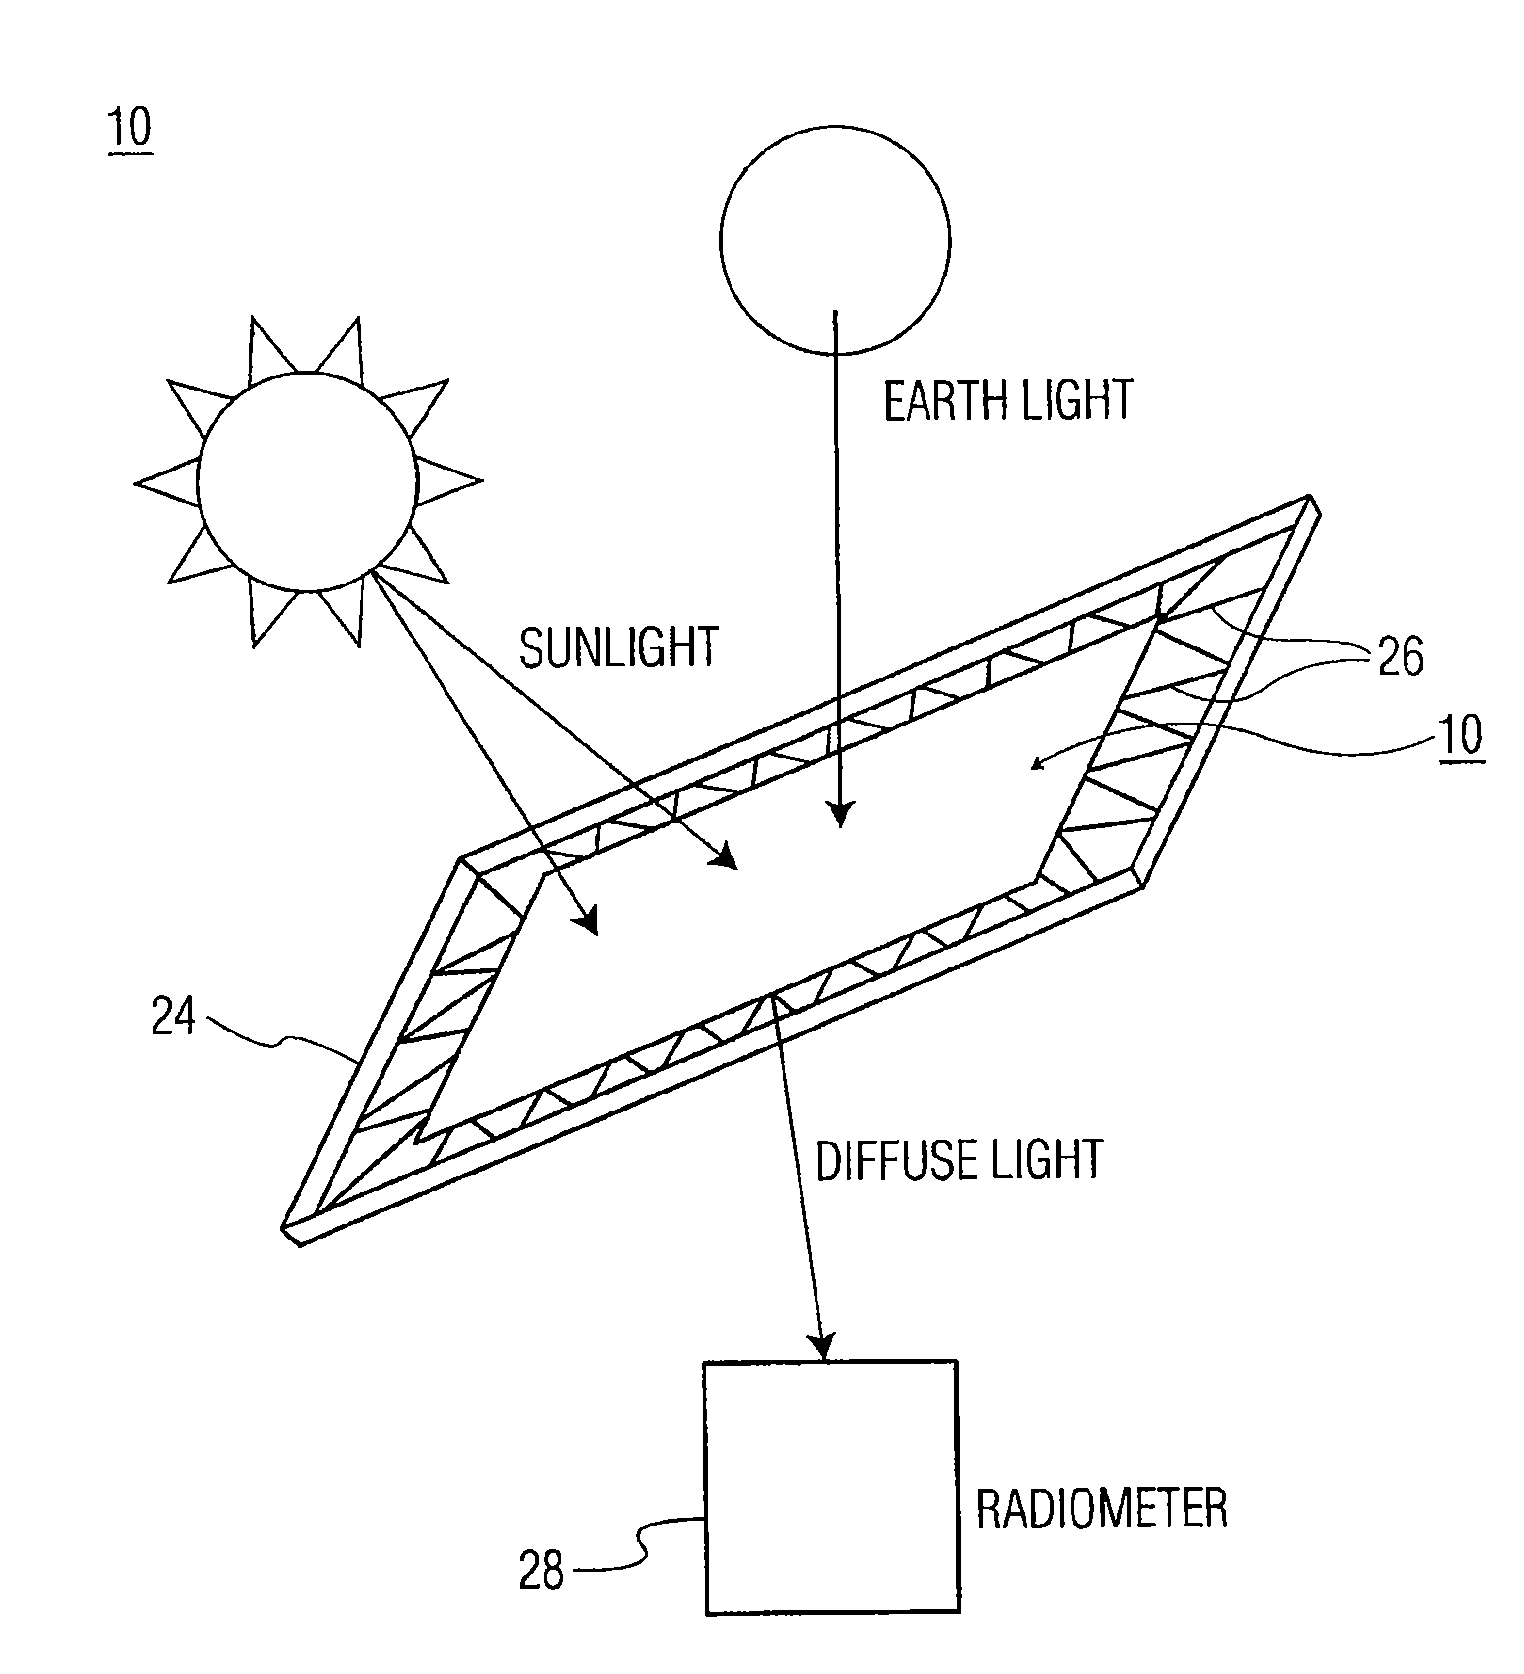 Transmissive diffuser with a layer of polytetrafluoroethylene on the output surface for use with an on-orbit radiometric calibration